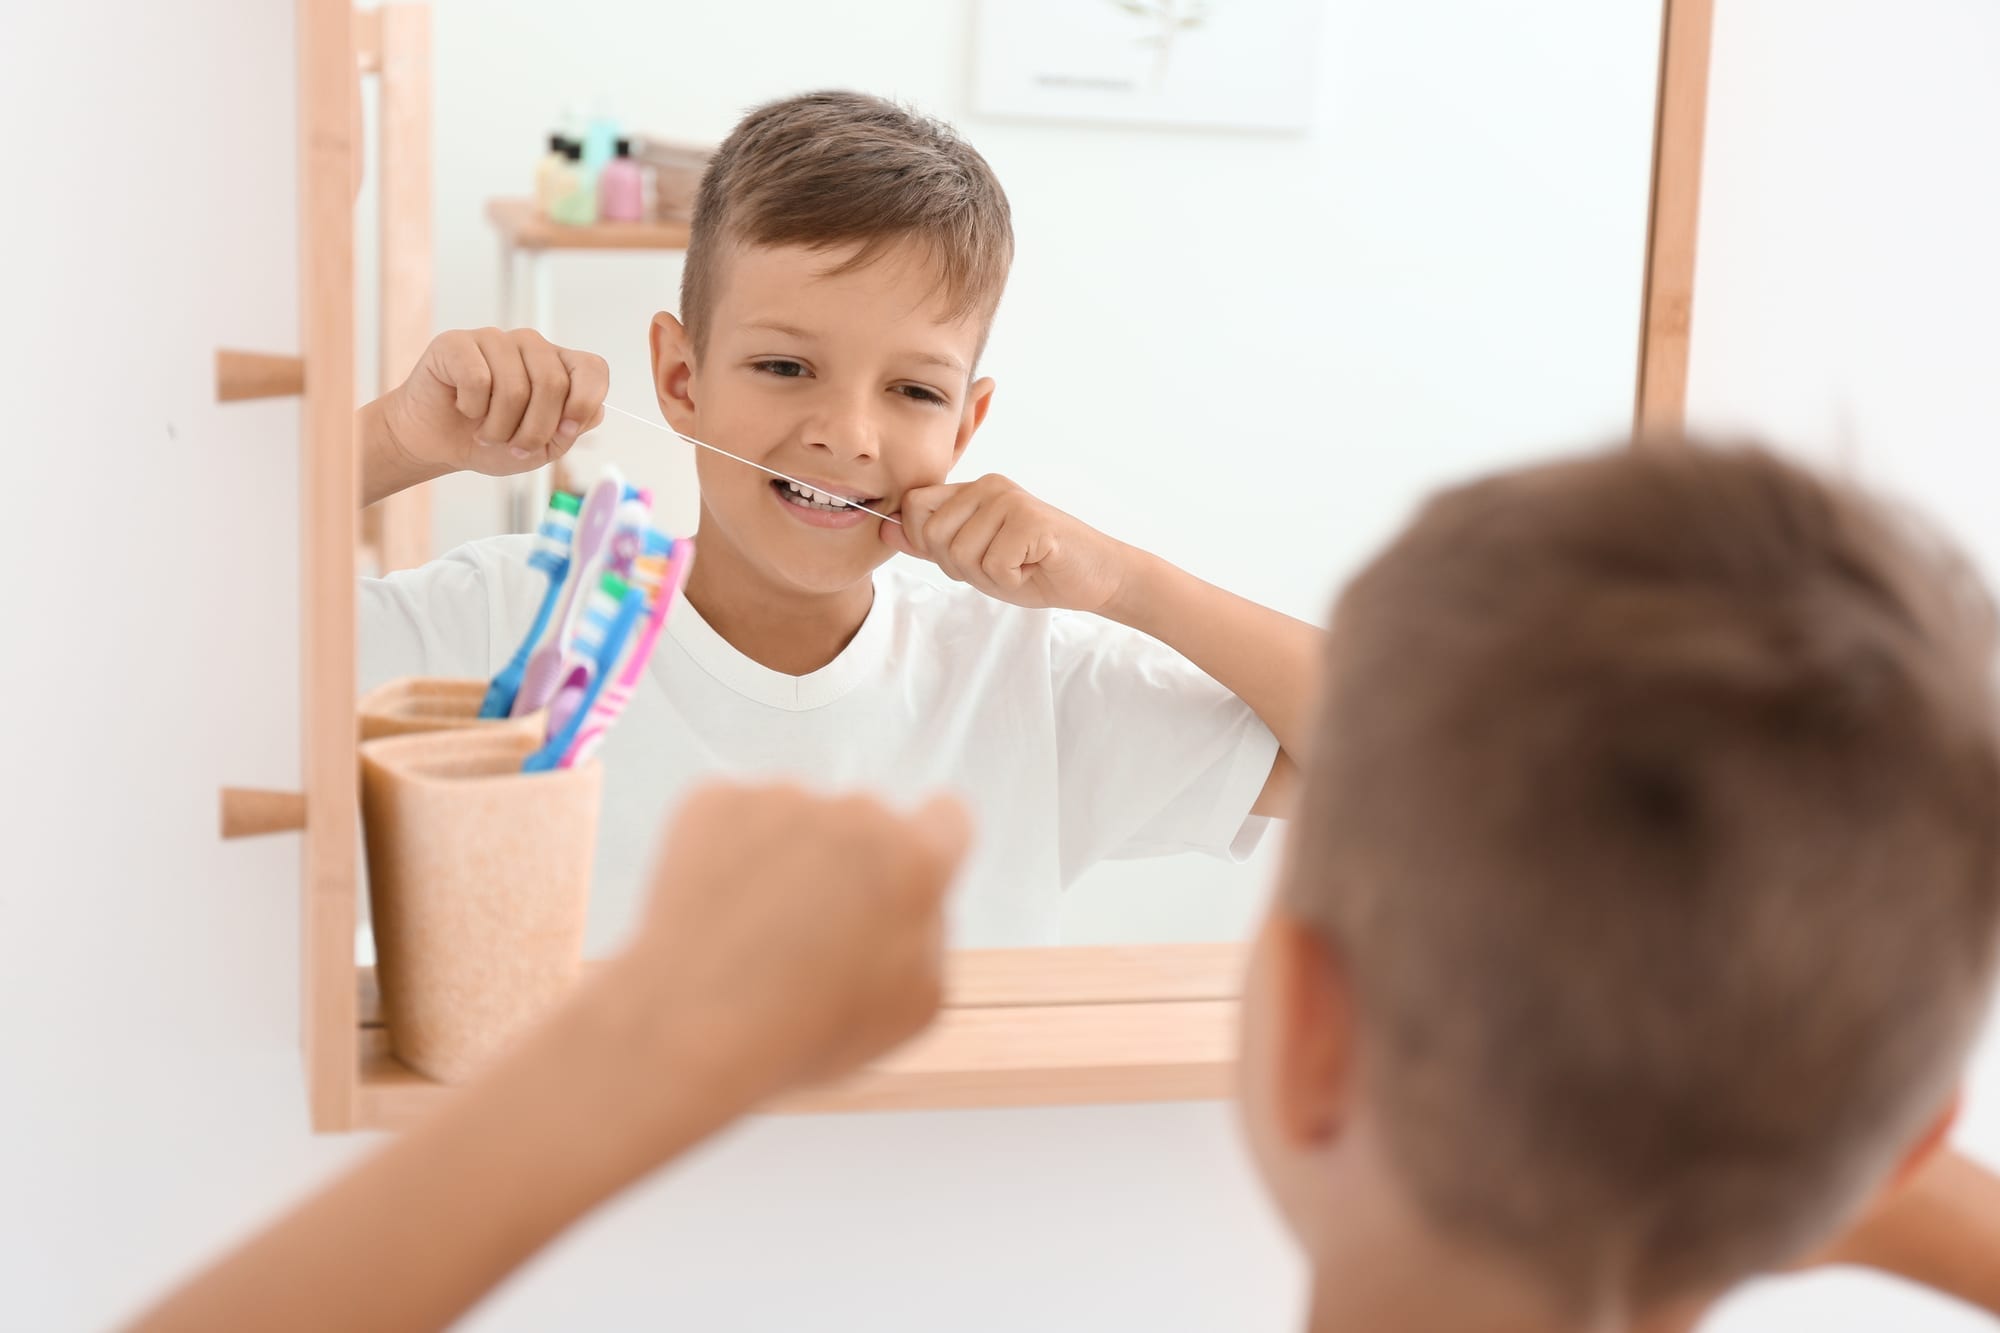 Brushing and Flossing Tips from a Children’s Dentist